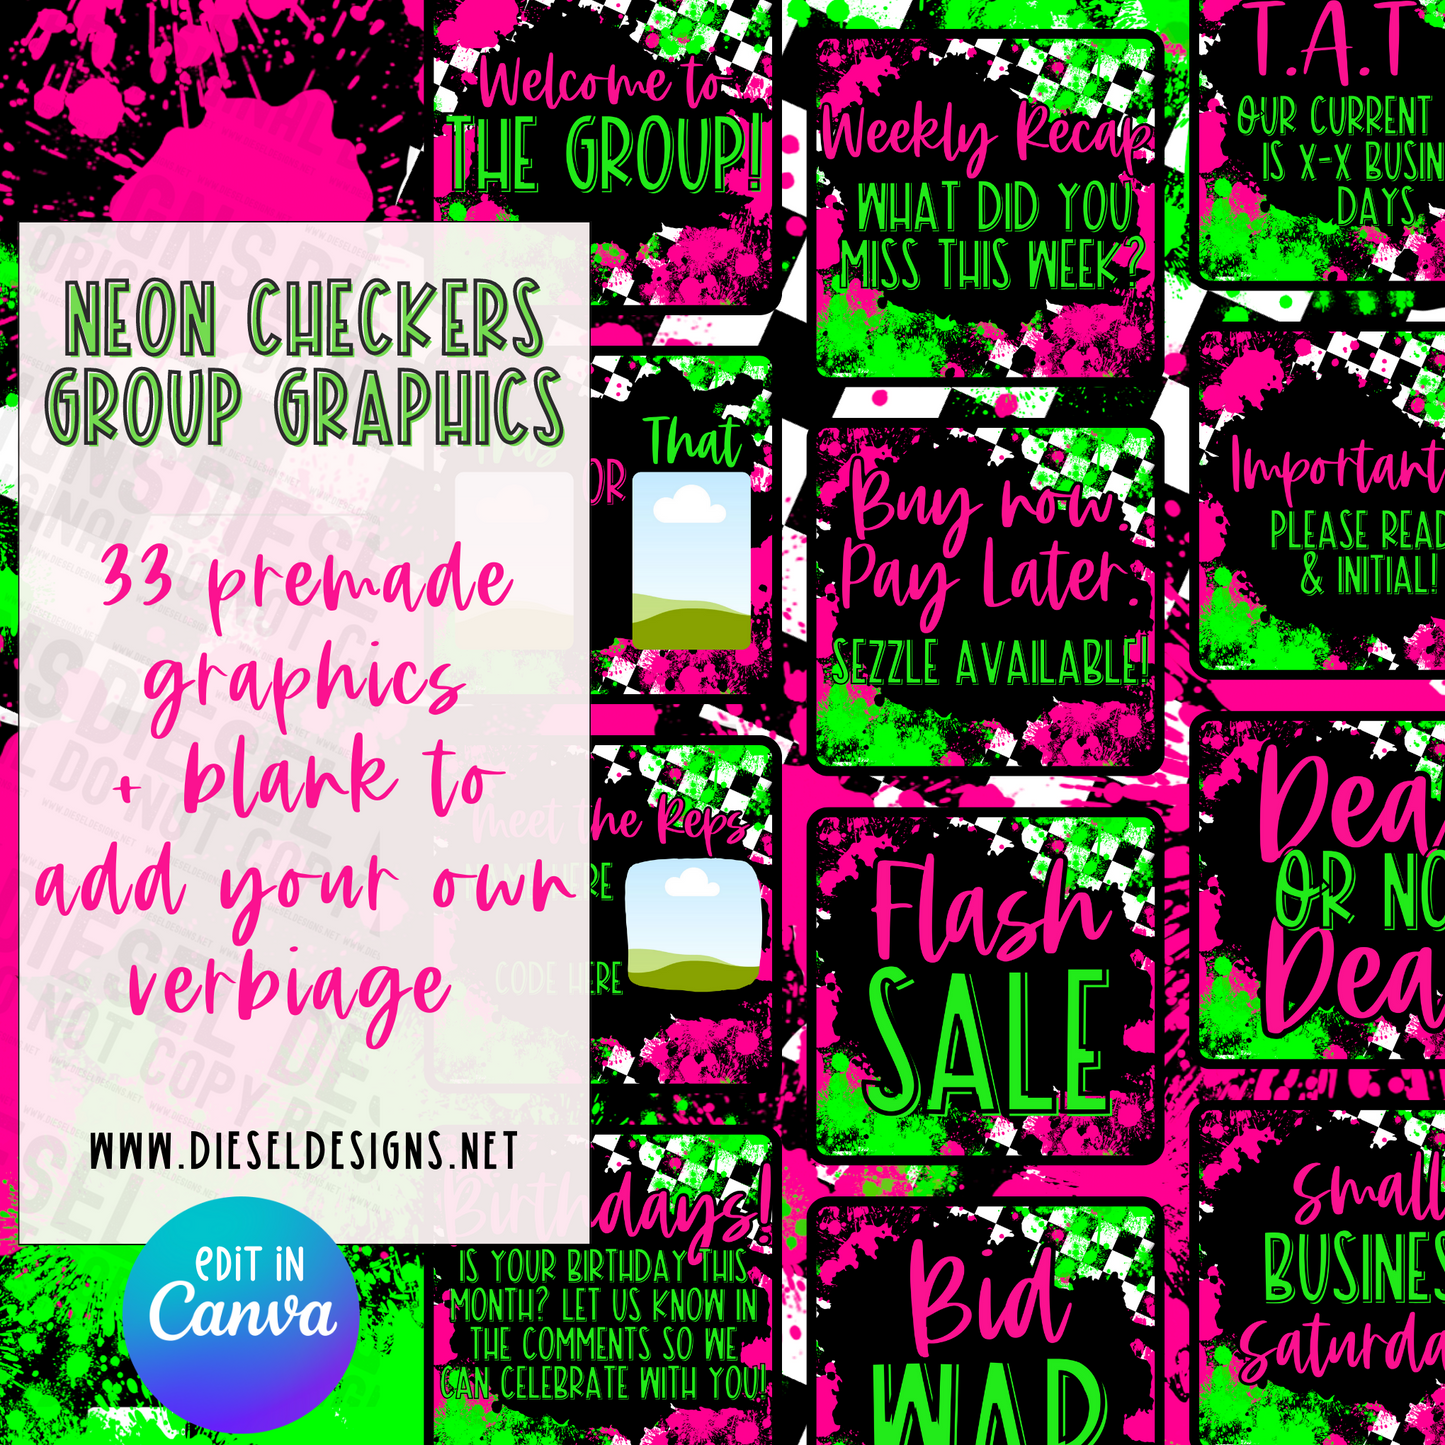 Neon Checkers | Facebook Group Graphics | Editable CANVA | 34 Files